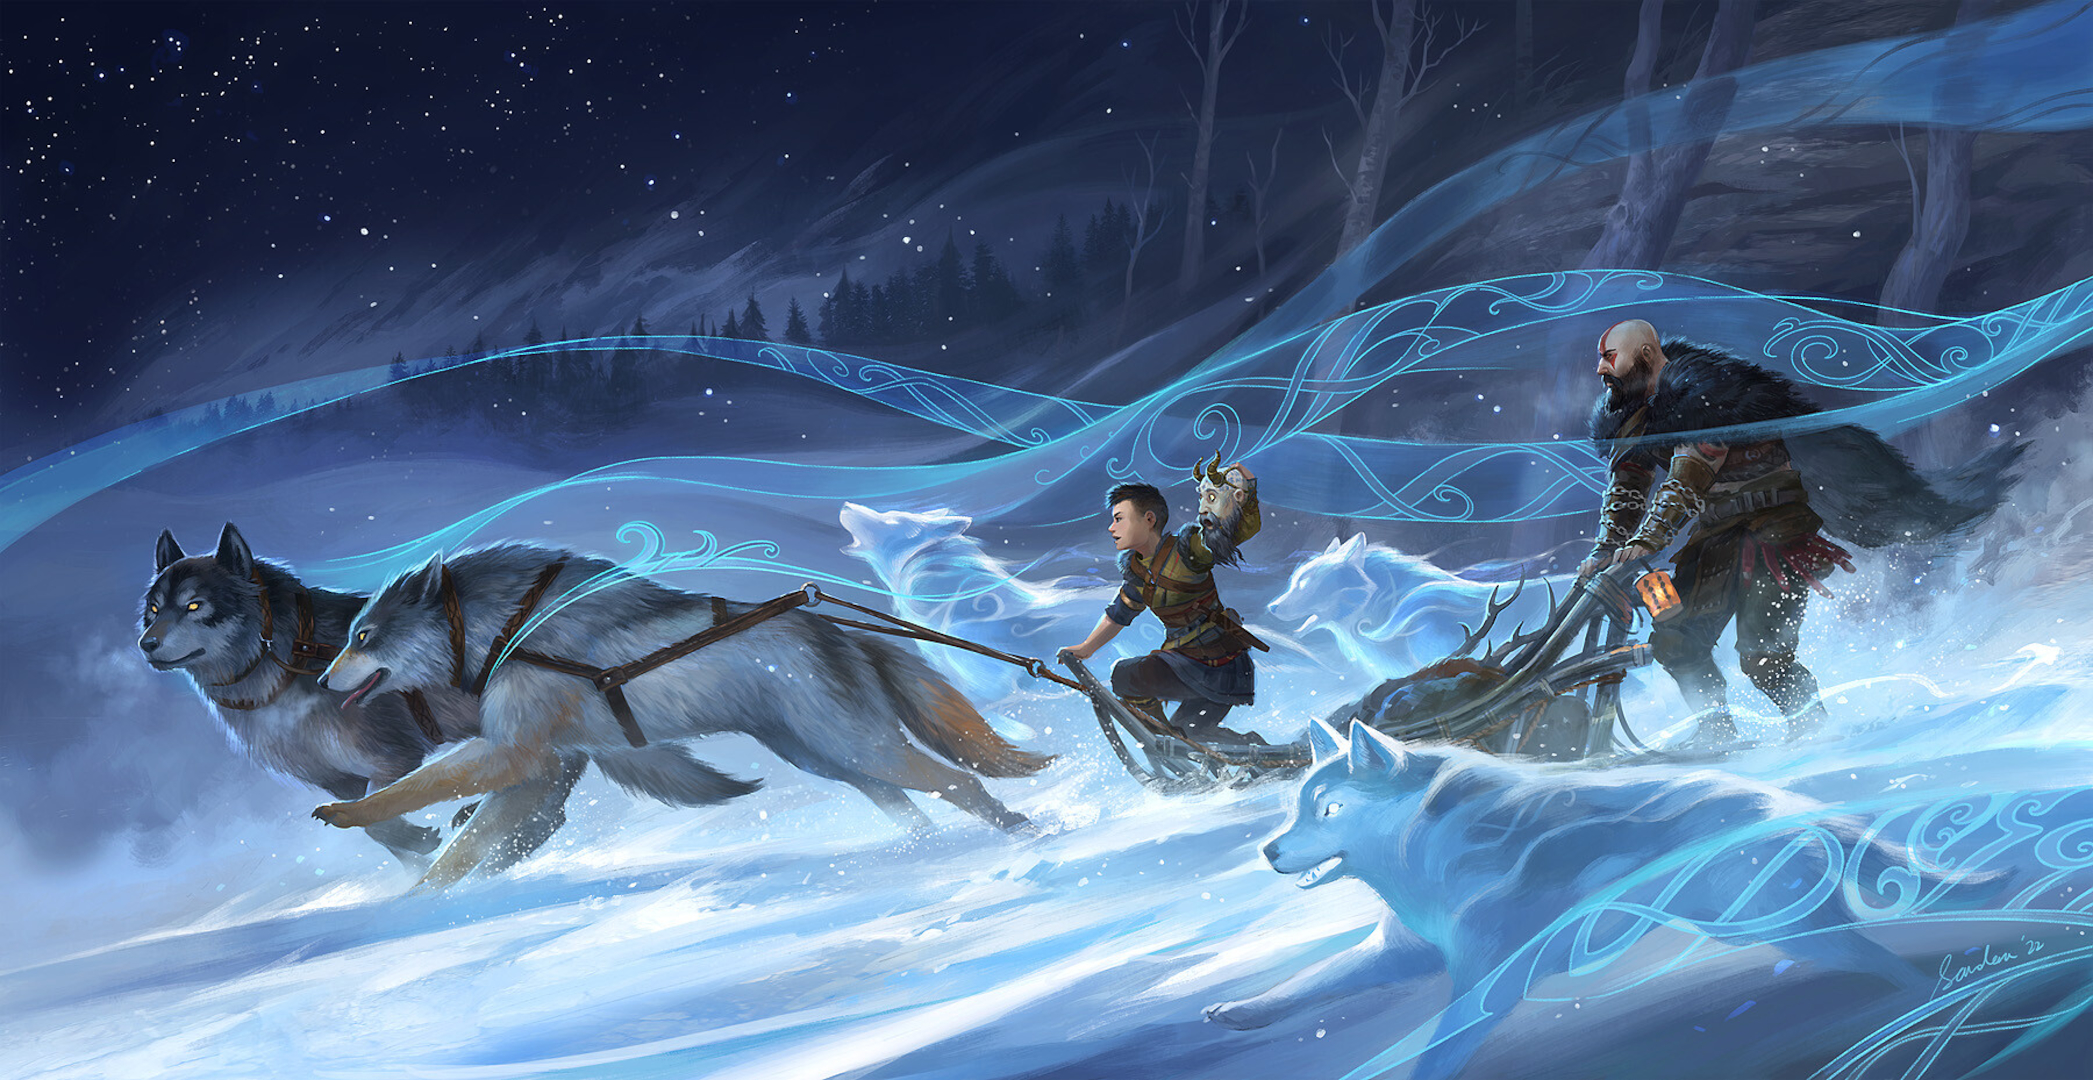 Running with the Wolves by Sandara Tang